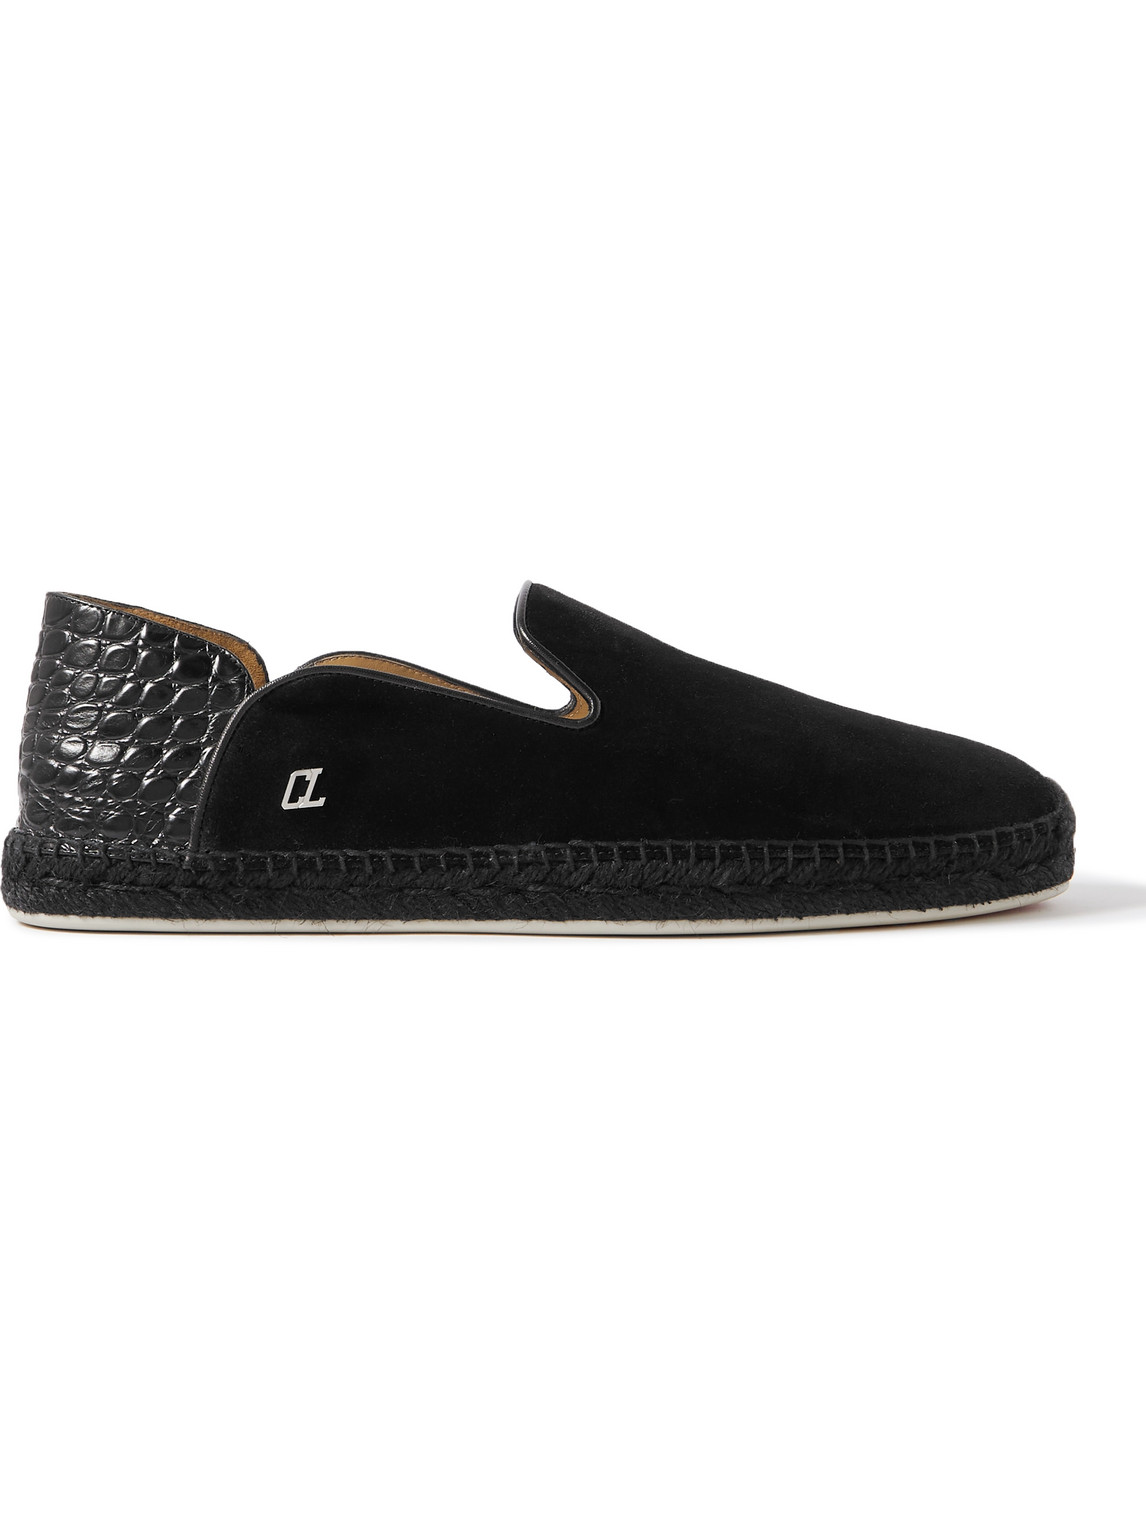 Christian Louboutin Collapsible-heel Croc-effect Leather-trimmed Suede Espadrilles In Black